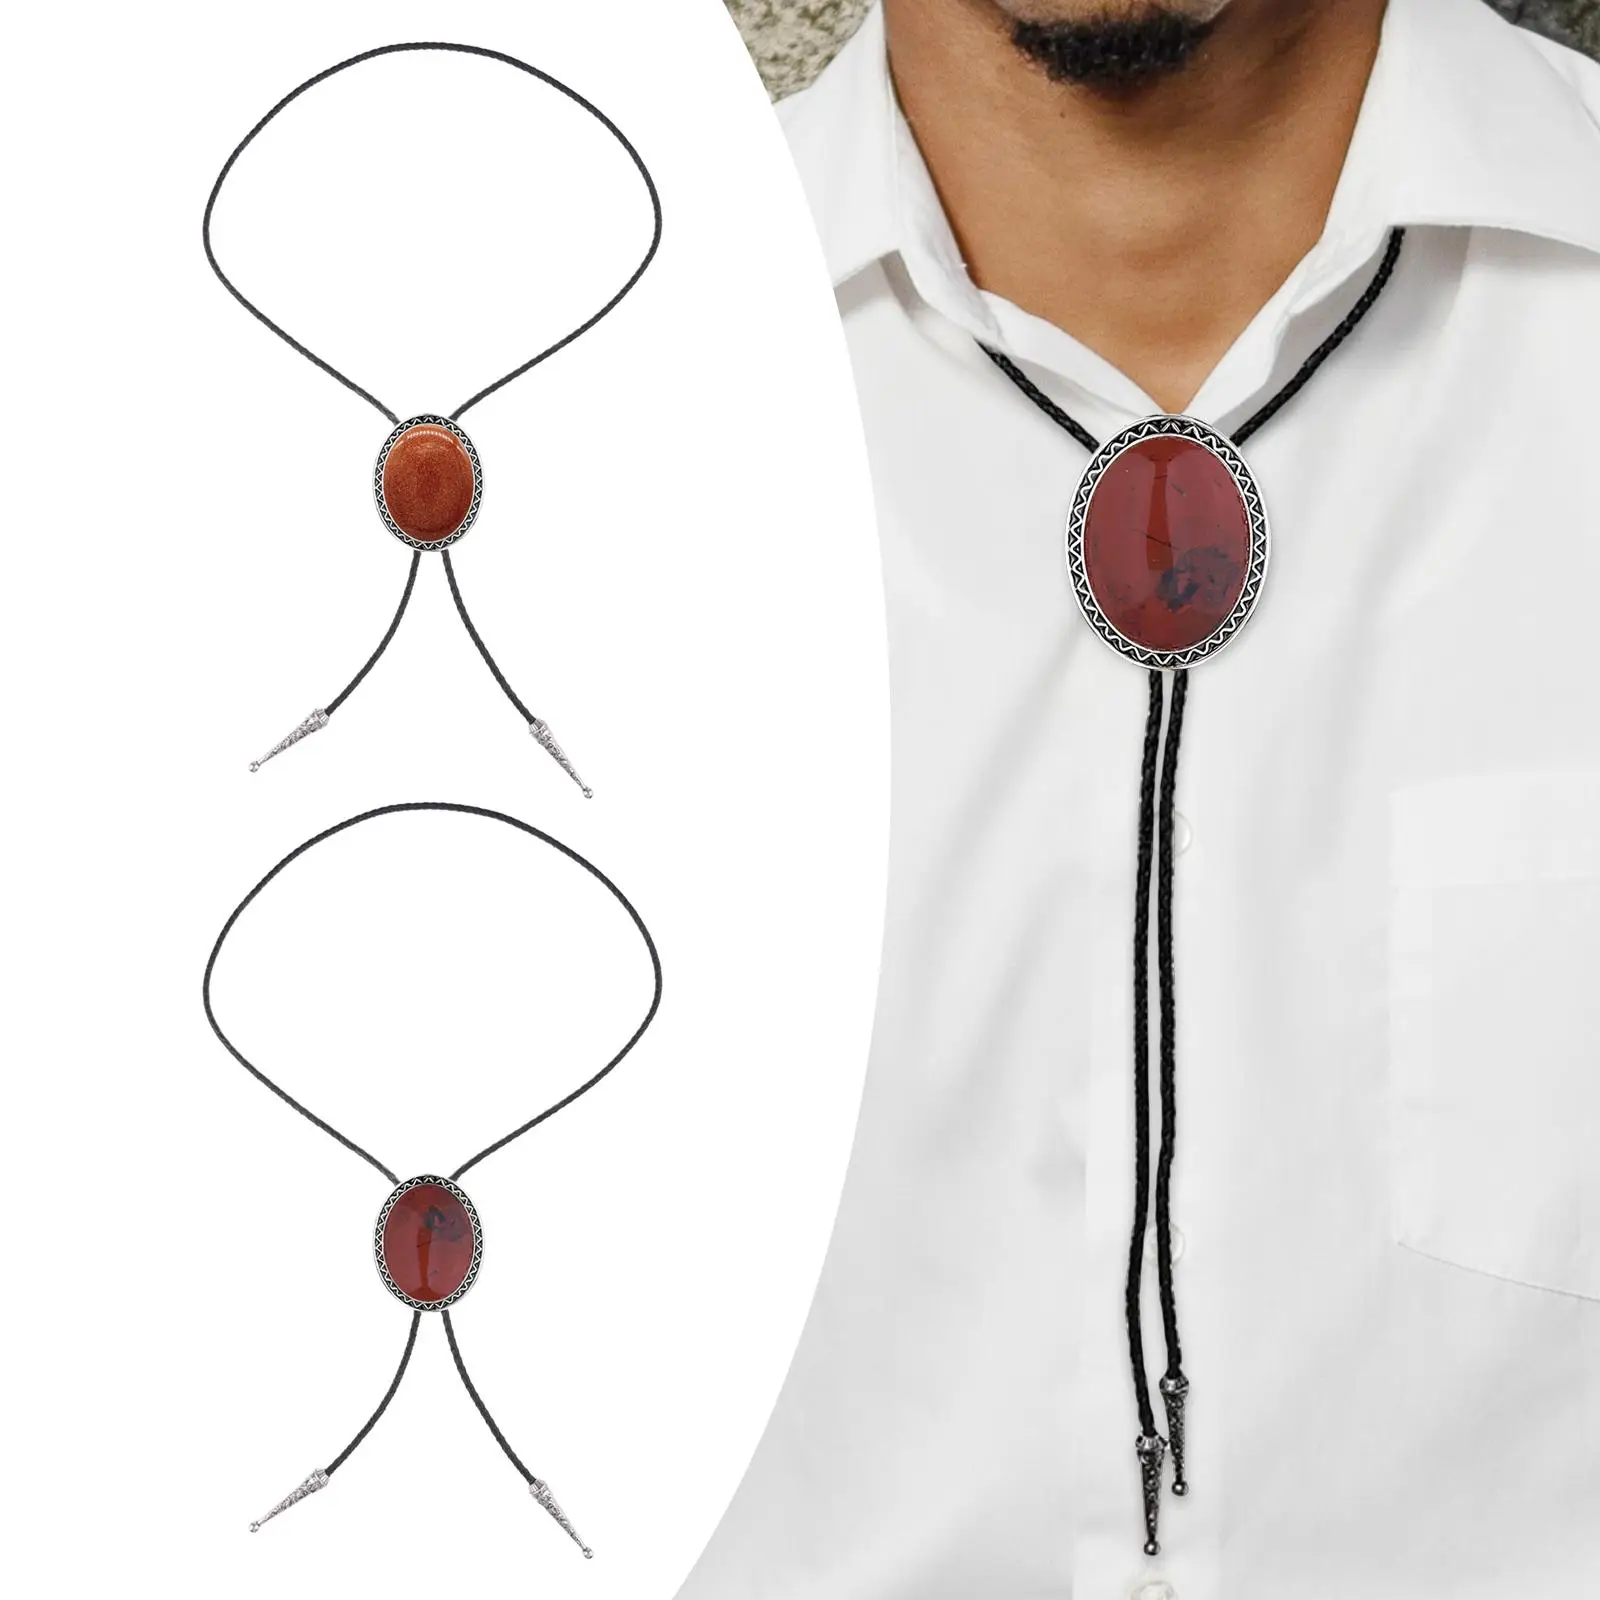 Cowboy Bolo Tie American Style Pendant Stylish Chain Vintage Style Fashion Necktie for Graduation Anniversary Prom Party Banquet